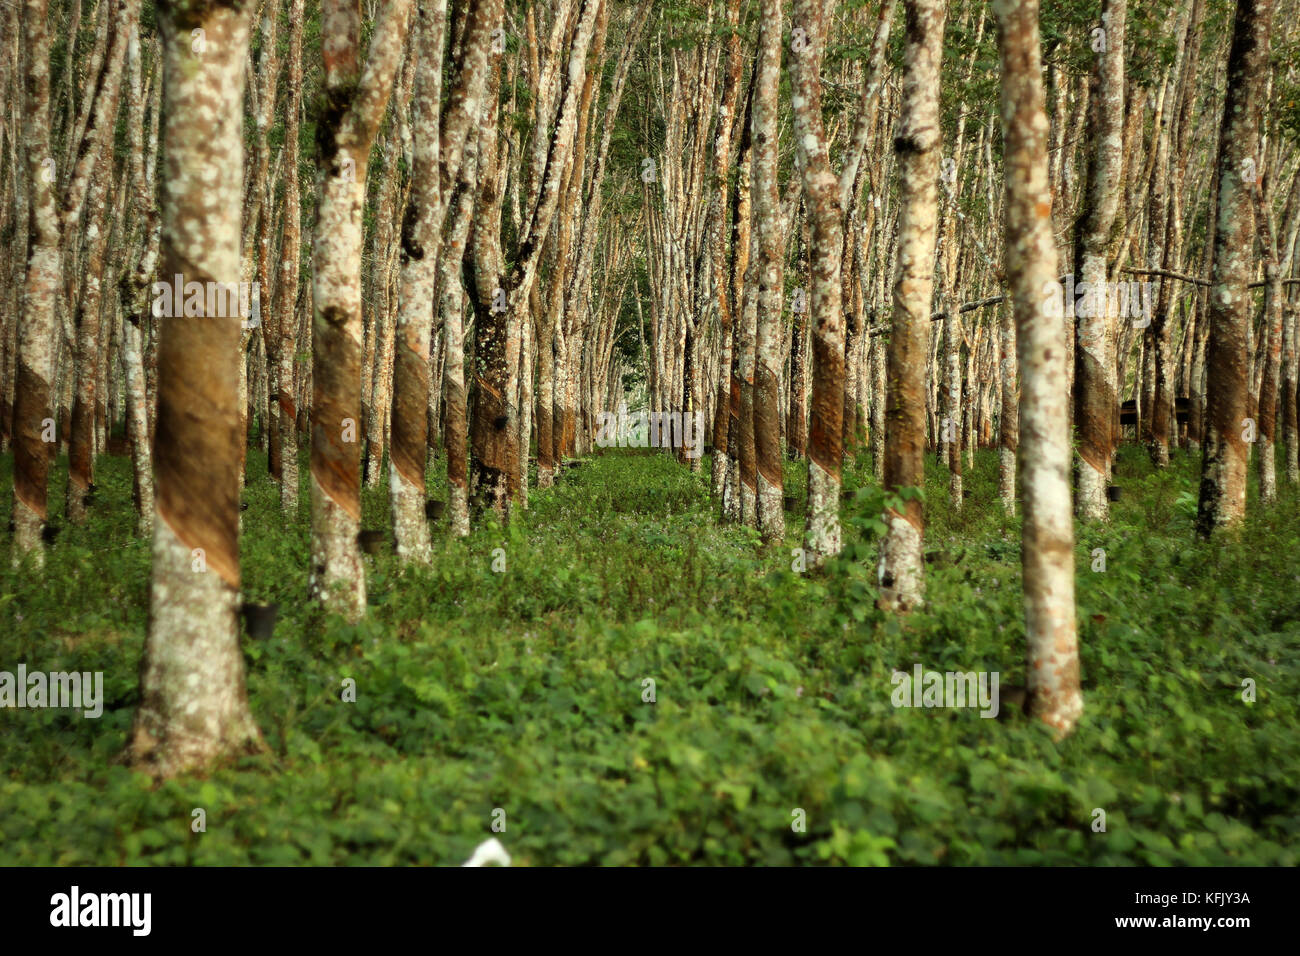 Pará rubber trees in Malaysia Stock Photo